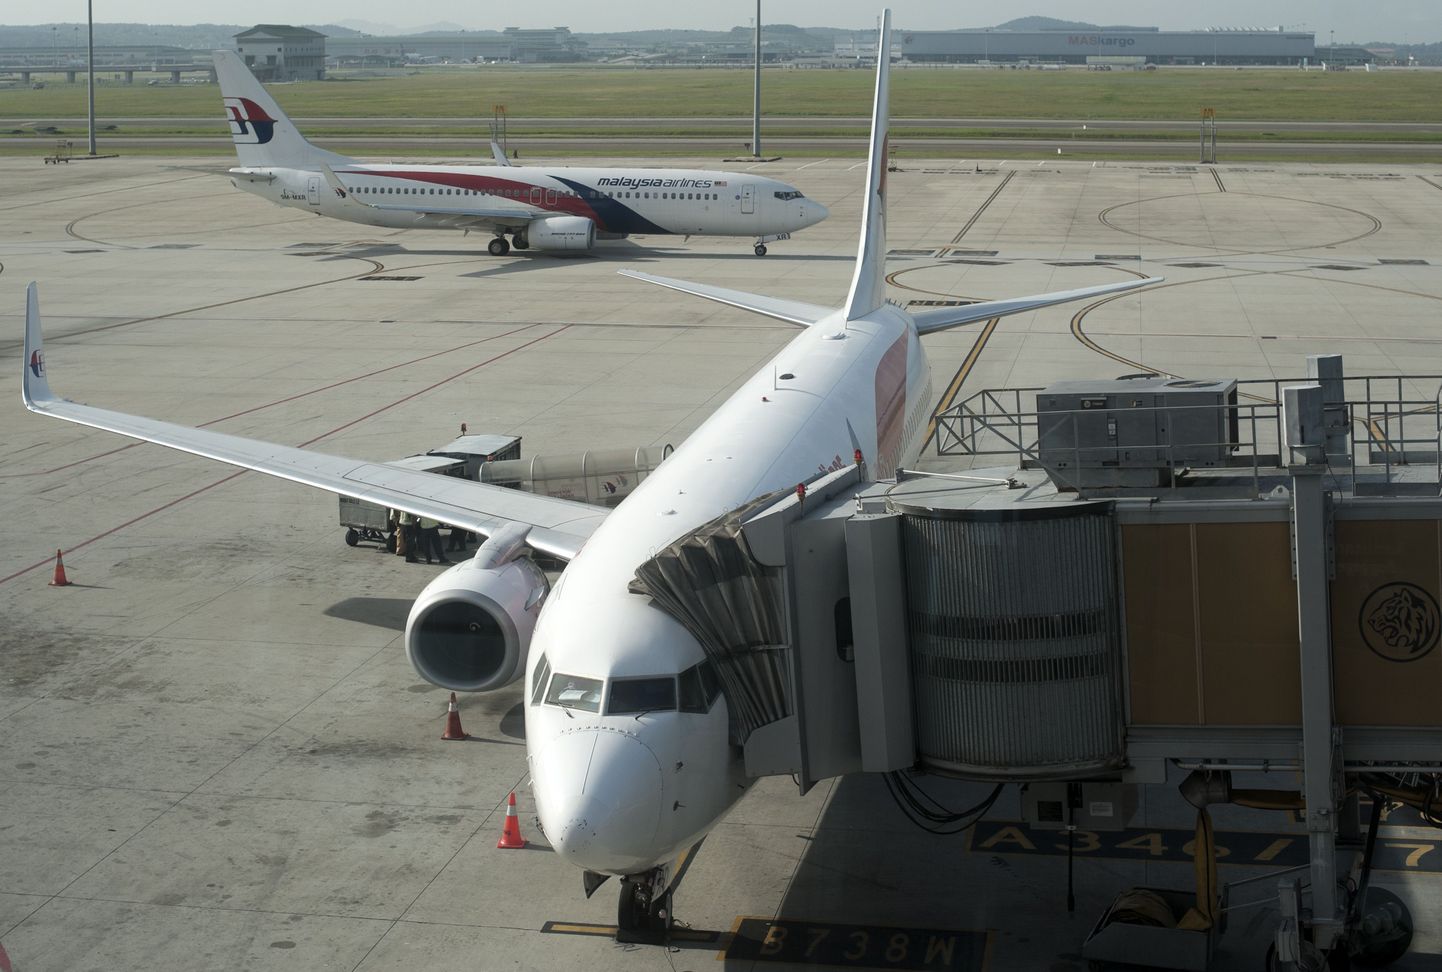 Malaysia airlines planes are seen on the tarmac at the Kuala Lumpur International Airport in Sepang on July 18, 2014. A Malaysian airliner carrying 298 people from Amsterdam to Kuala Lumpur crashed on July 17 in rebel-held east Ukraine, as Kiev said the jet was shot down in a "terrorist" attack. Ukraine's government and pro-Russian insurgents traded blame for the disaster, with comments attributed to a rebel commander suggesting his men may have downed Malaysia Airlines flight MH17 by mistake, believing it was a Ukrainian army transport plane. AFP PHOTO/ Nicolas ASFOURI